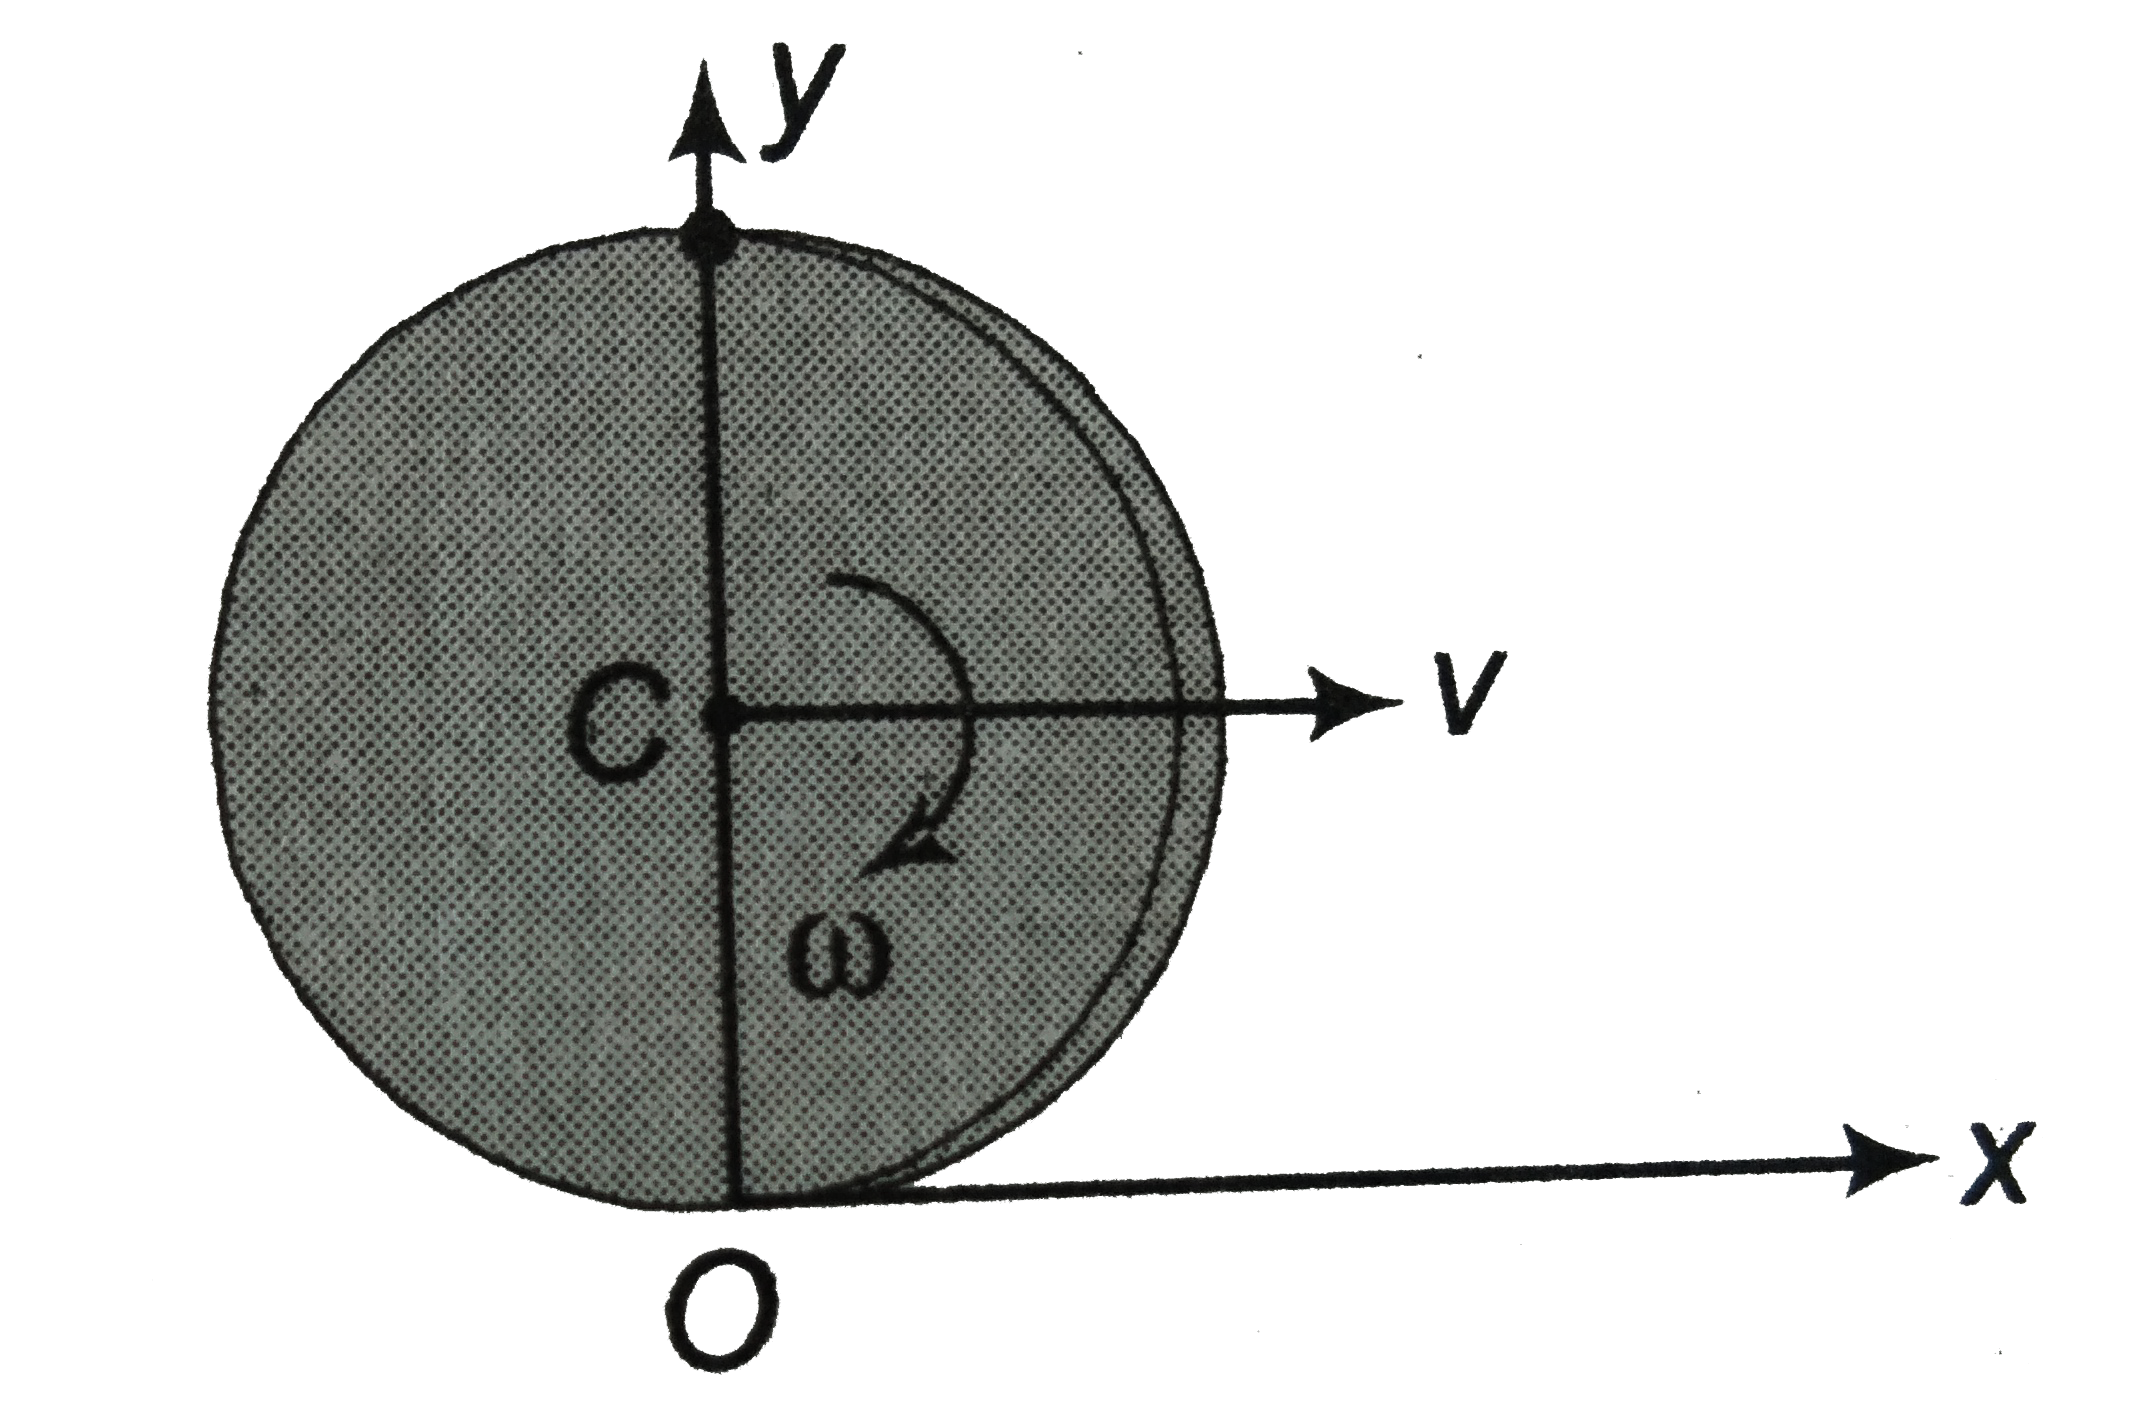 A disc of radius R starts at time t=0 moving along the positive x-axis with linear speed v and angular speed omega. Find the x and y coordinates of the bottom most poitn at any time t.